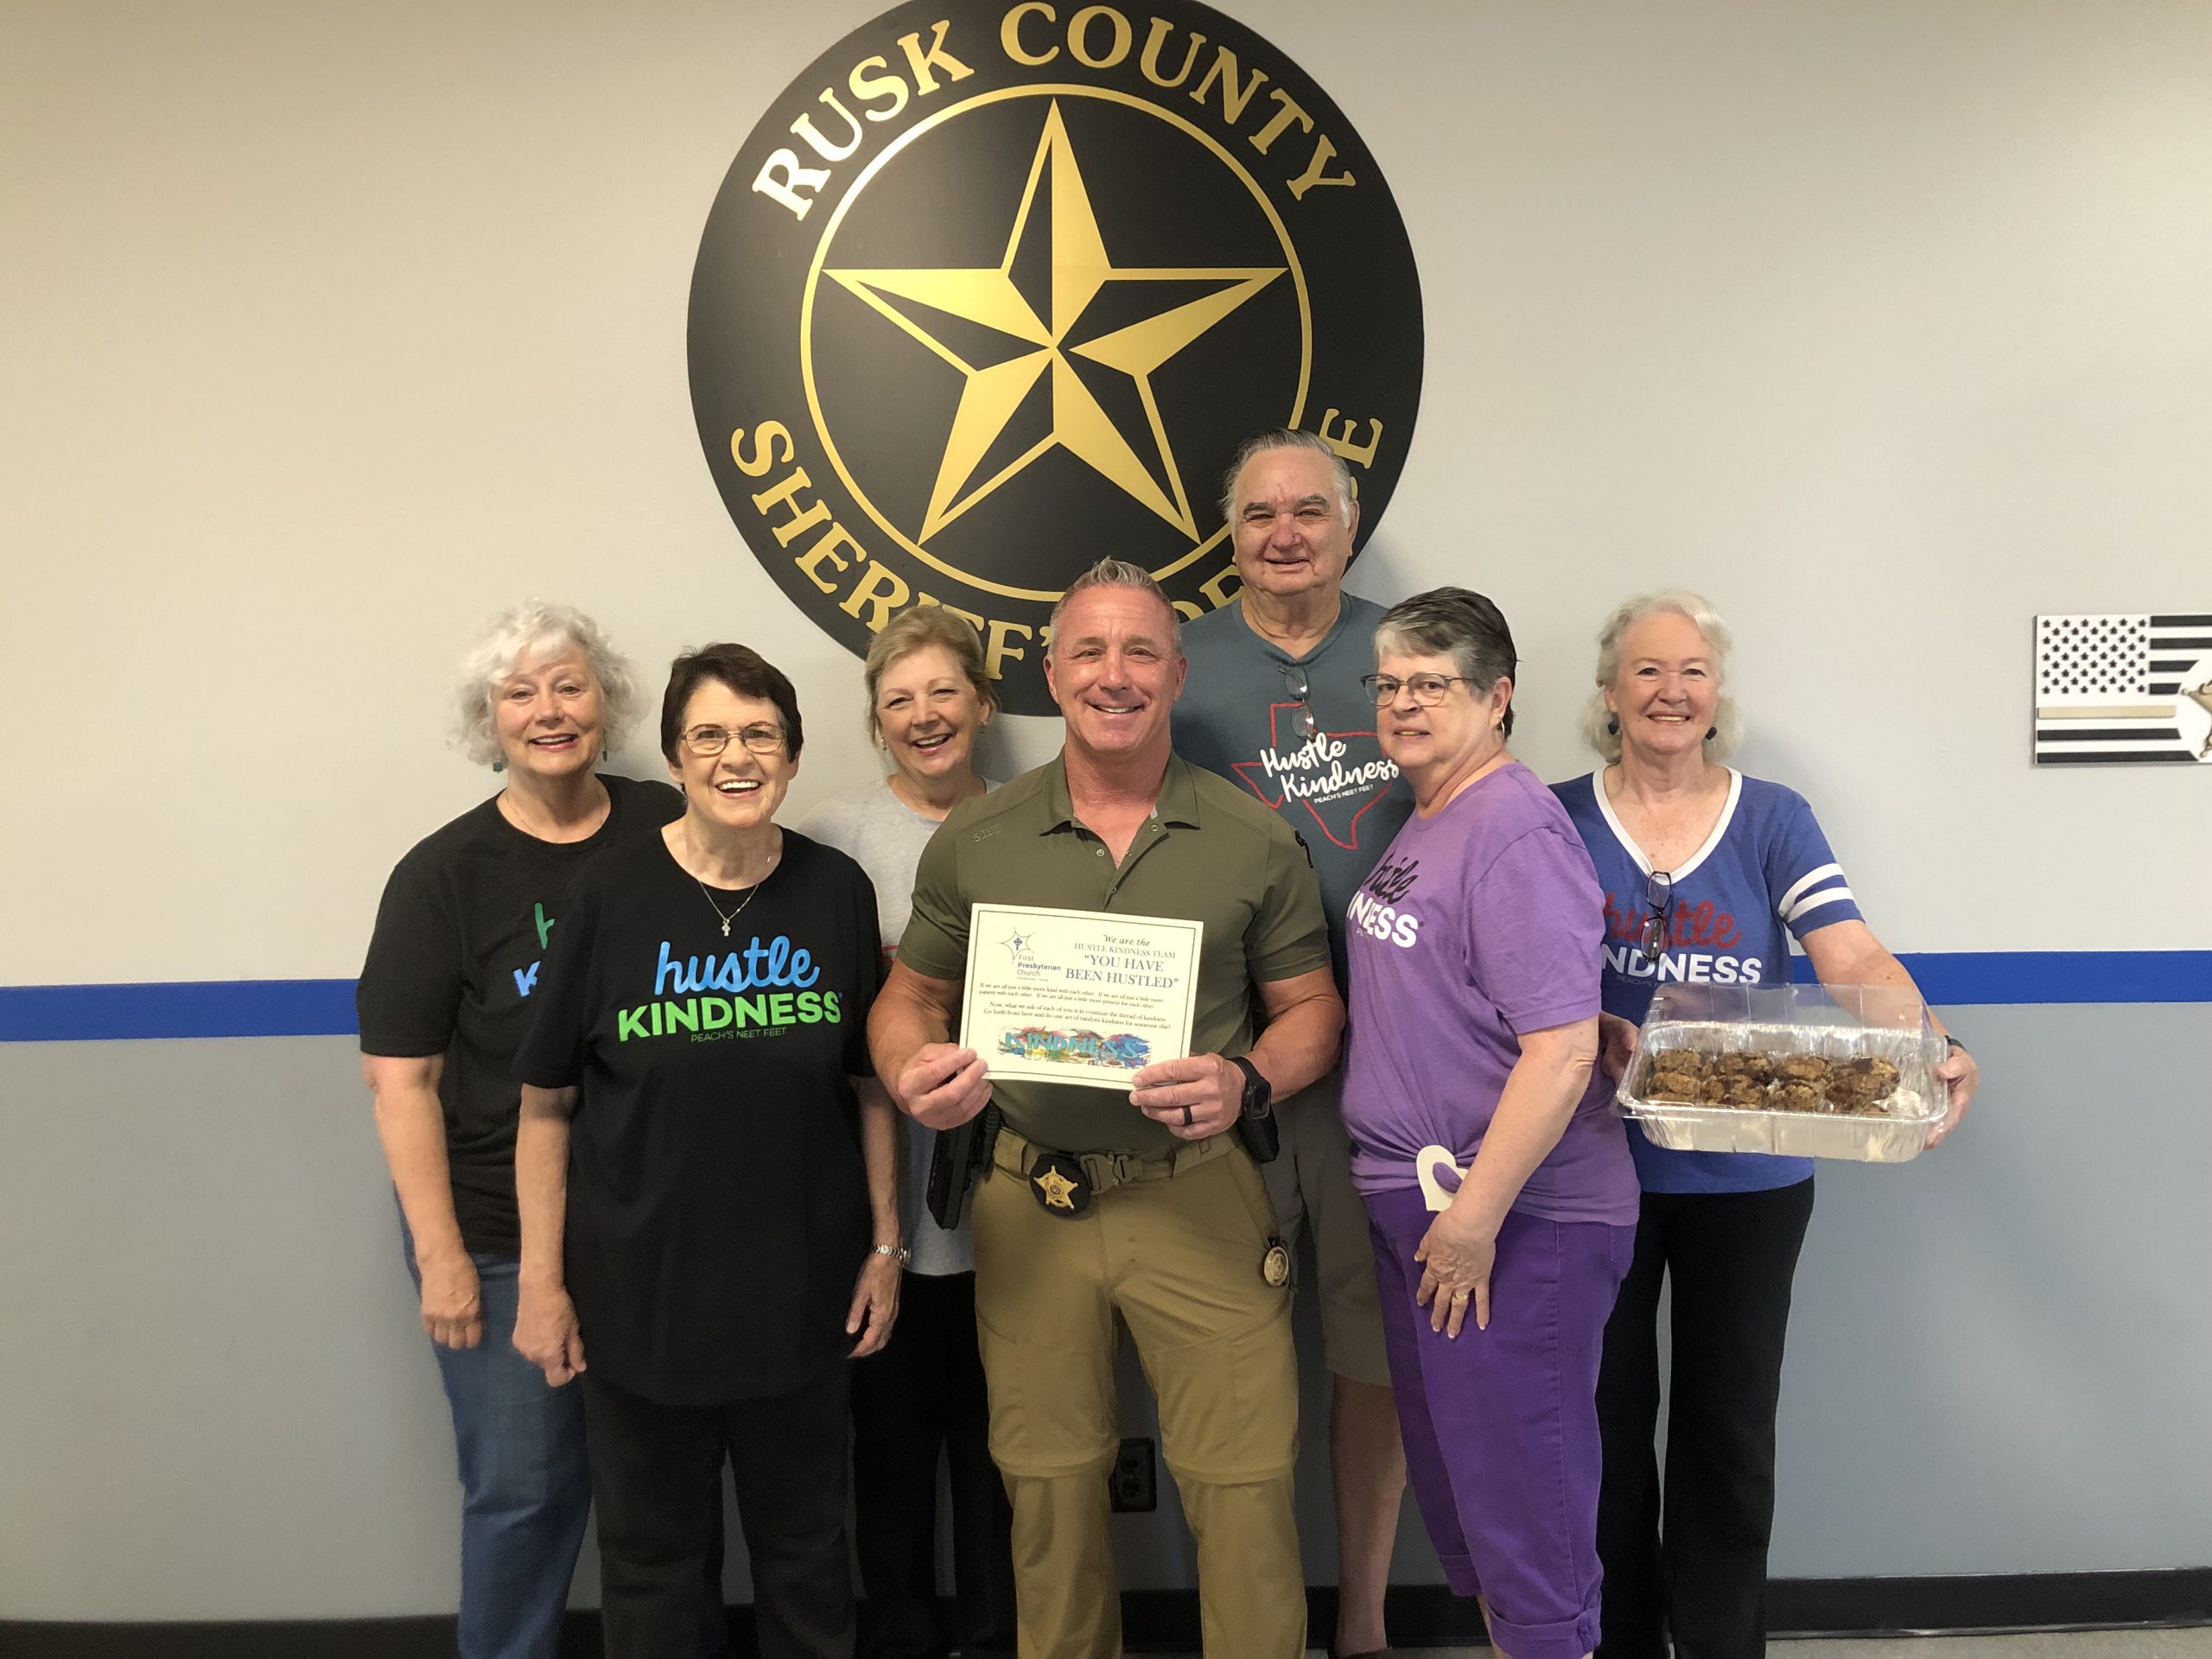 The Hustle Kindness Team "Hustles" the Rusk County Sheriff's Office with homemade muffins